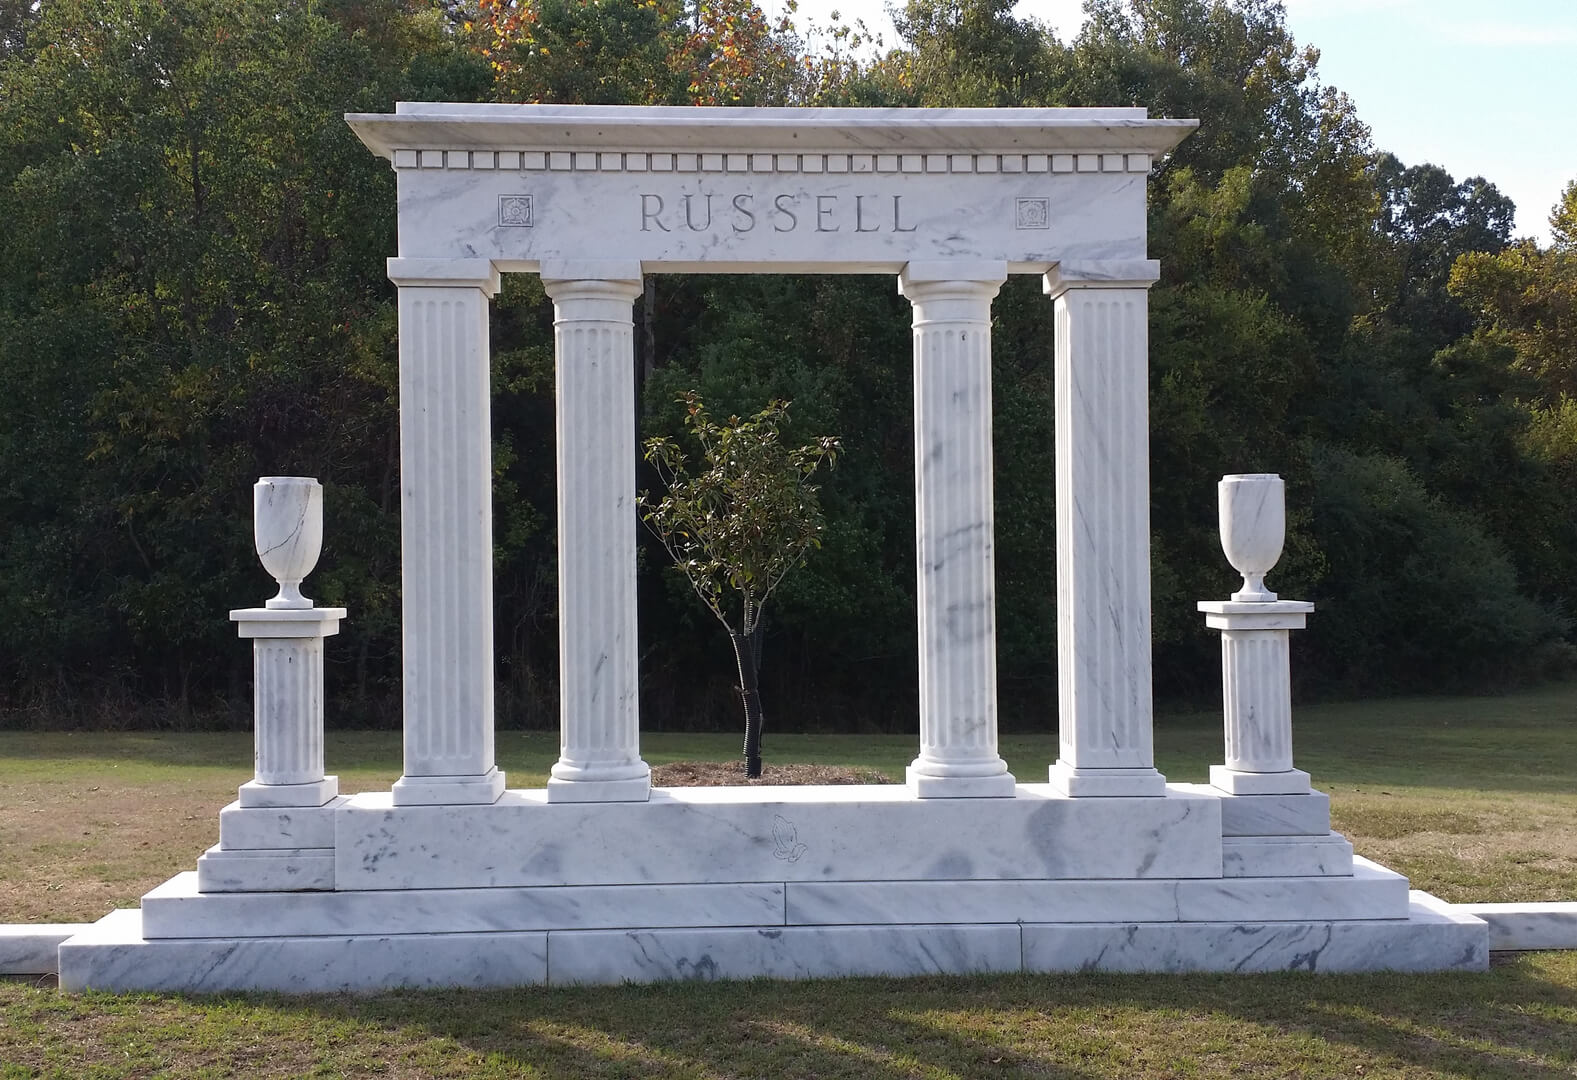 A unique shaped mausoleum with the name Russel